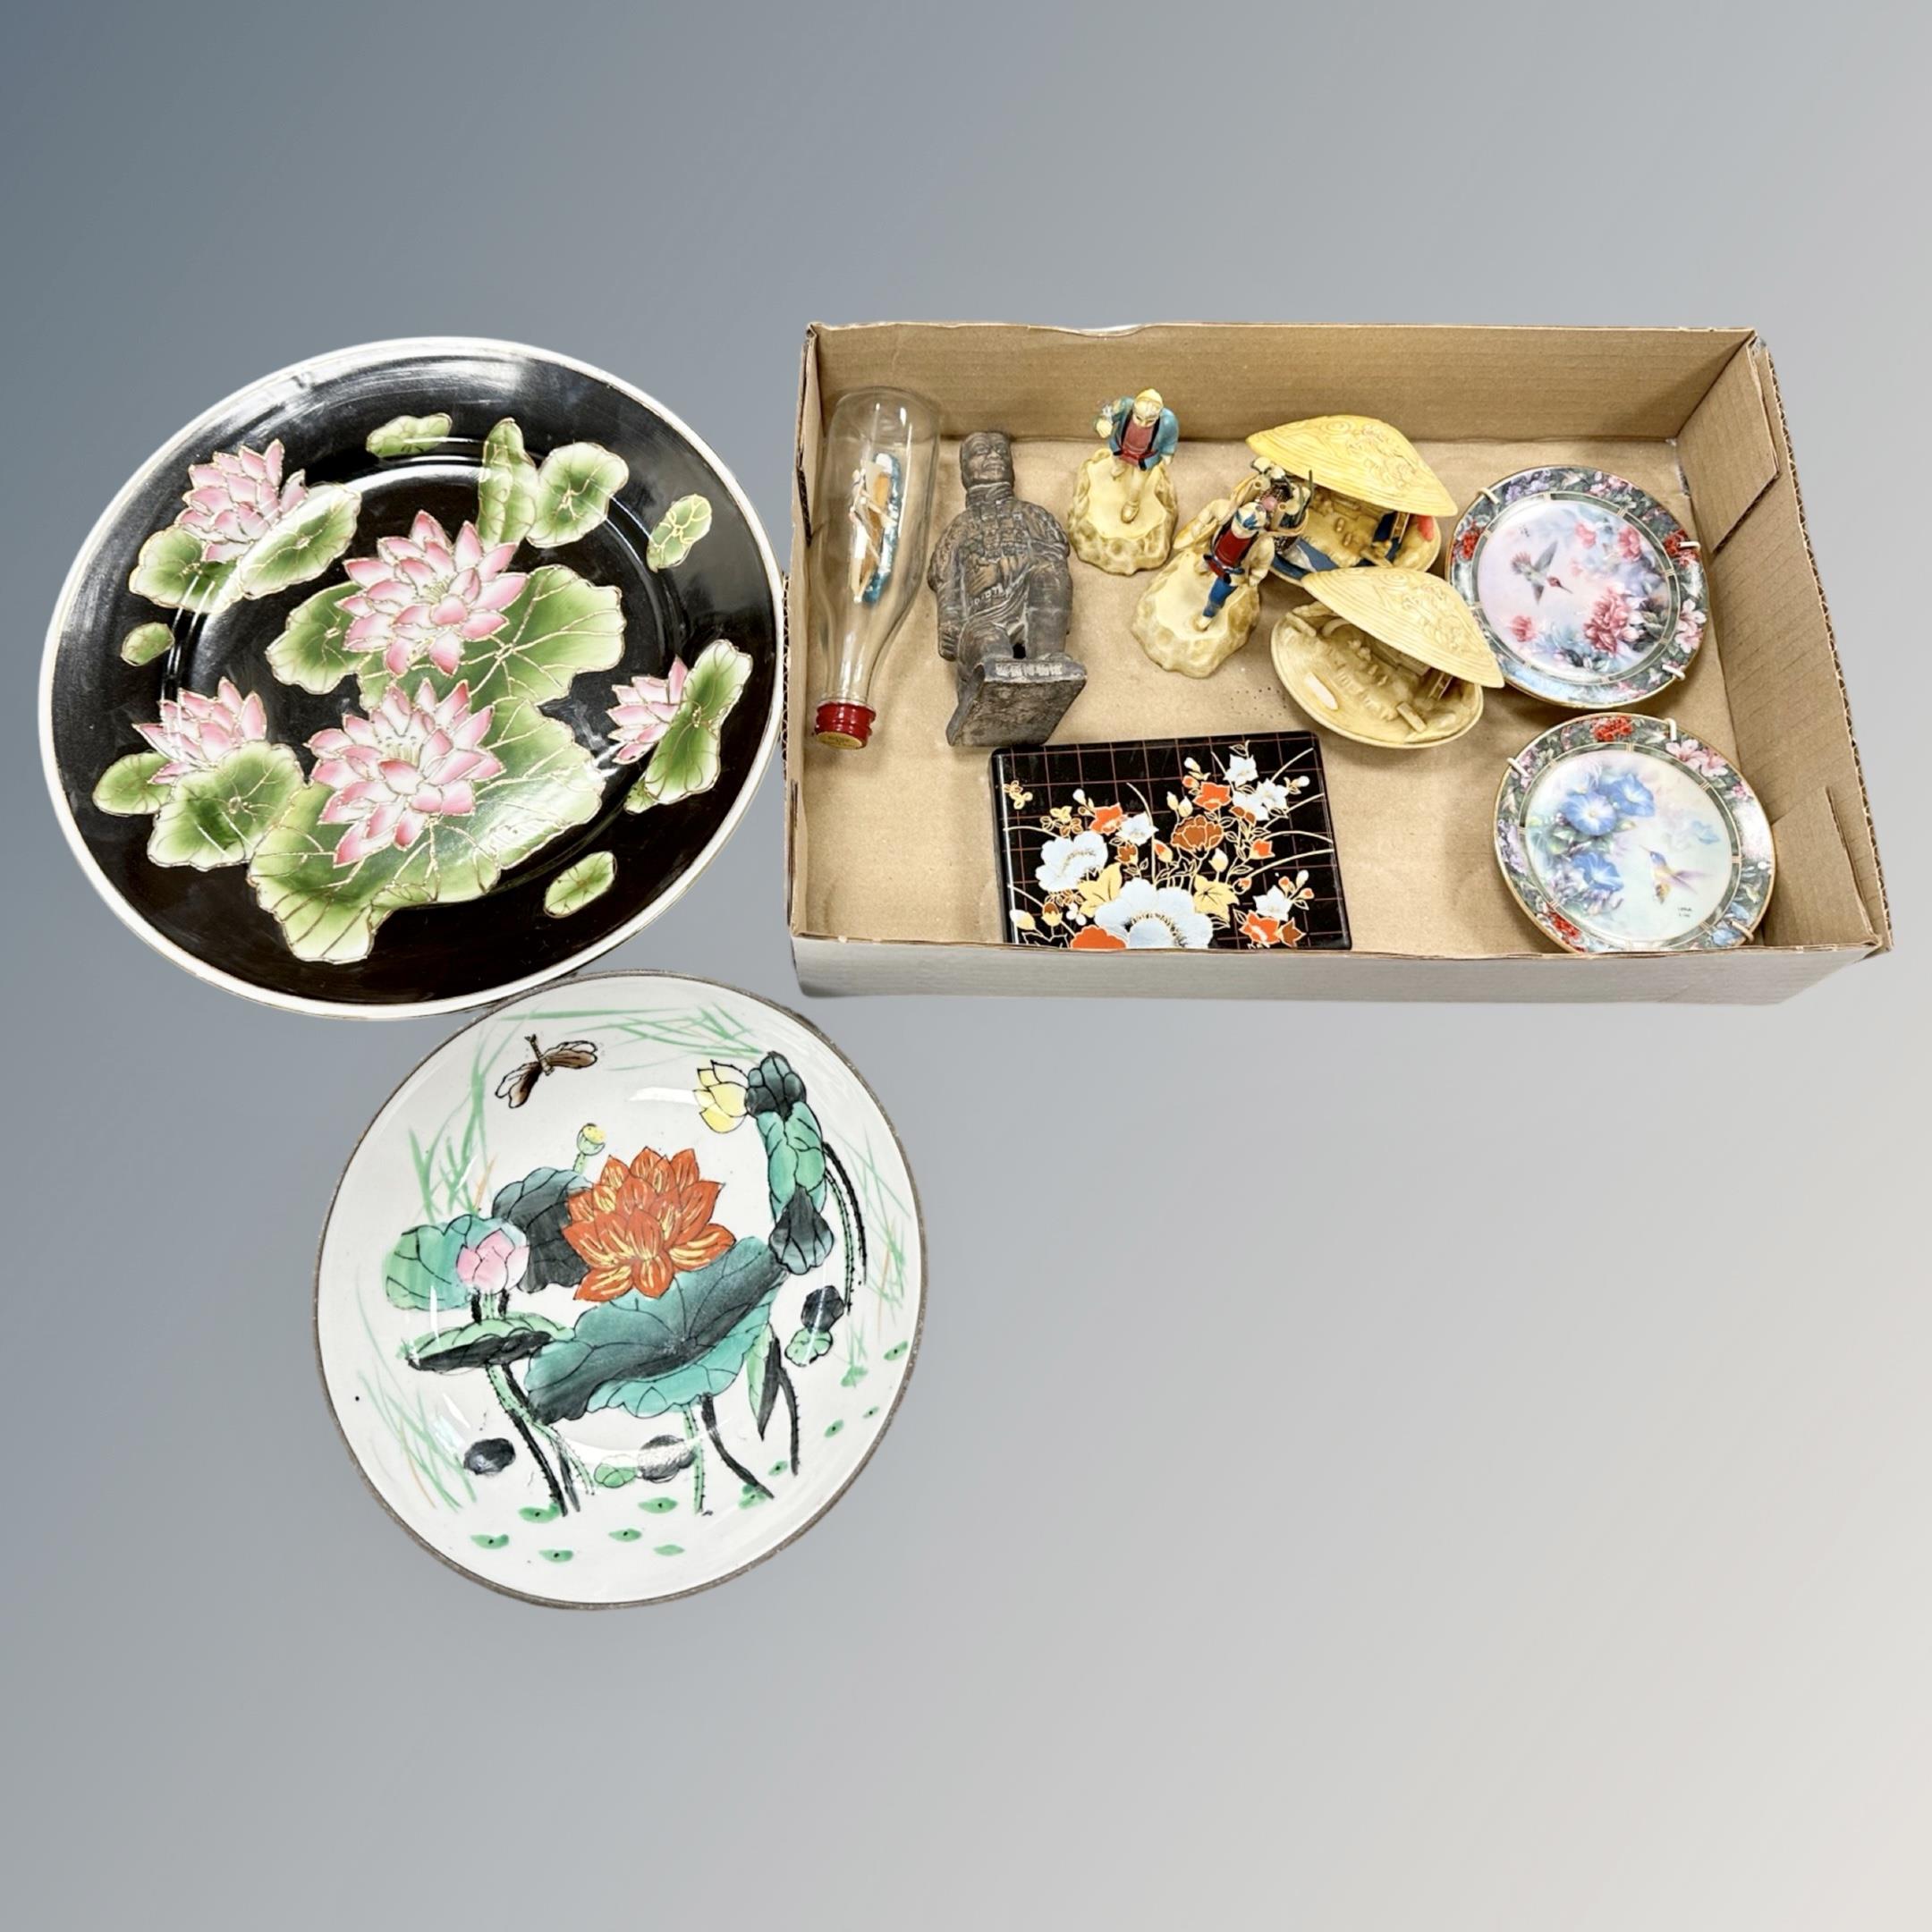 Two oriental plates and a box containing similar figures,